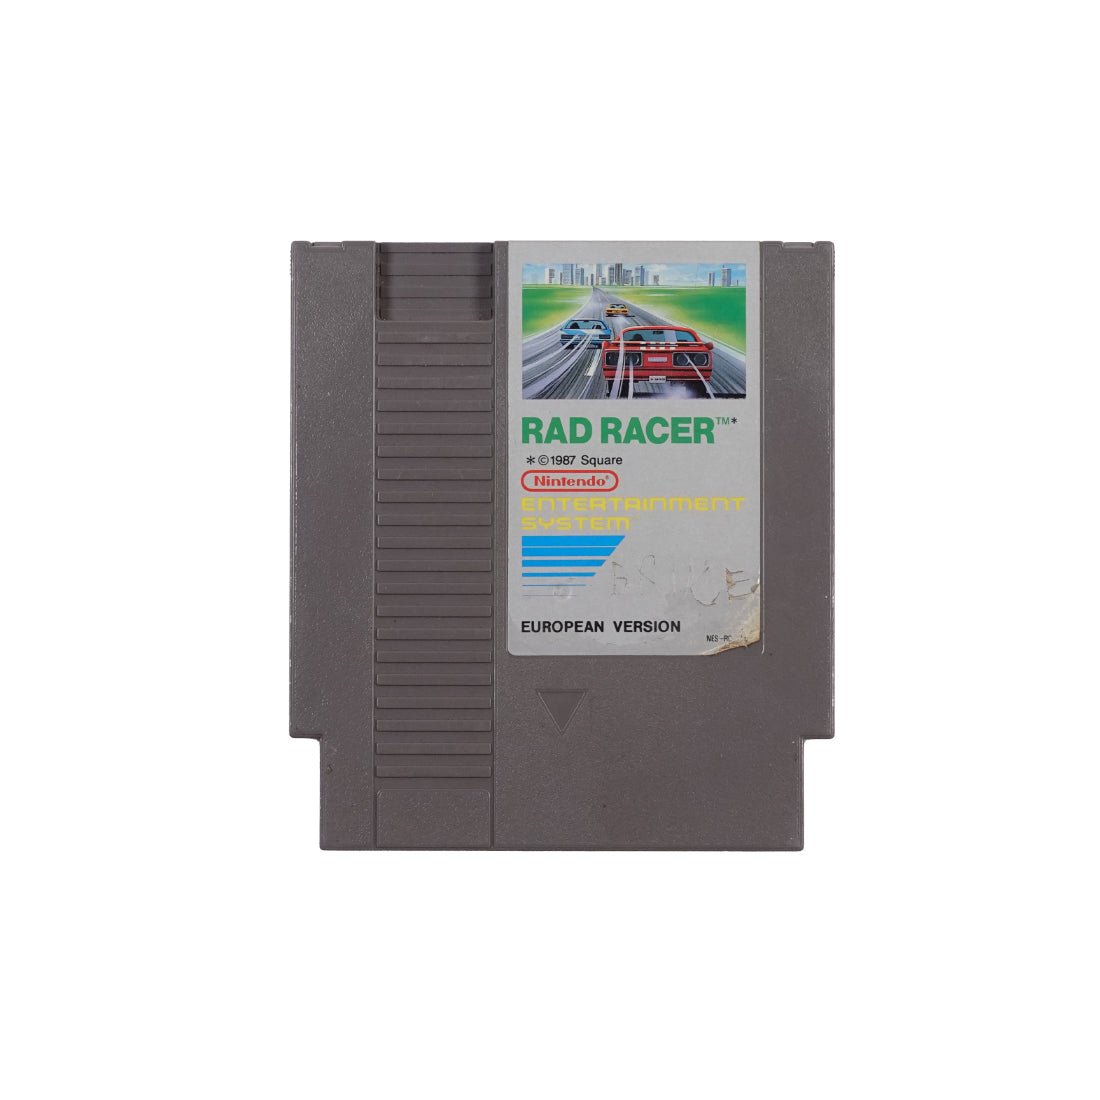 (Pre-Owned) Rad Racer - Nintendo Entertainment System - Store 974 | ستور ٩٧٤